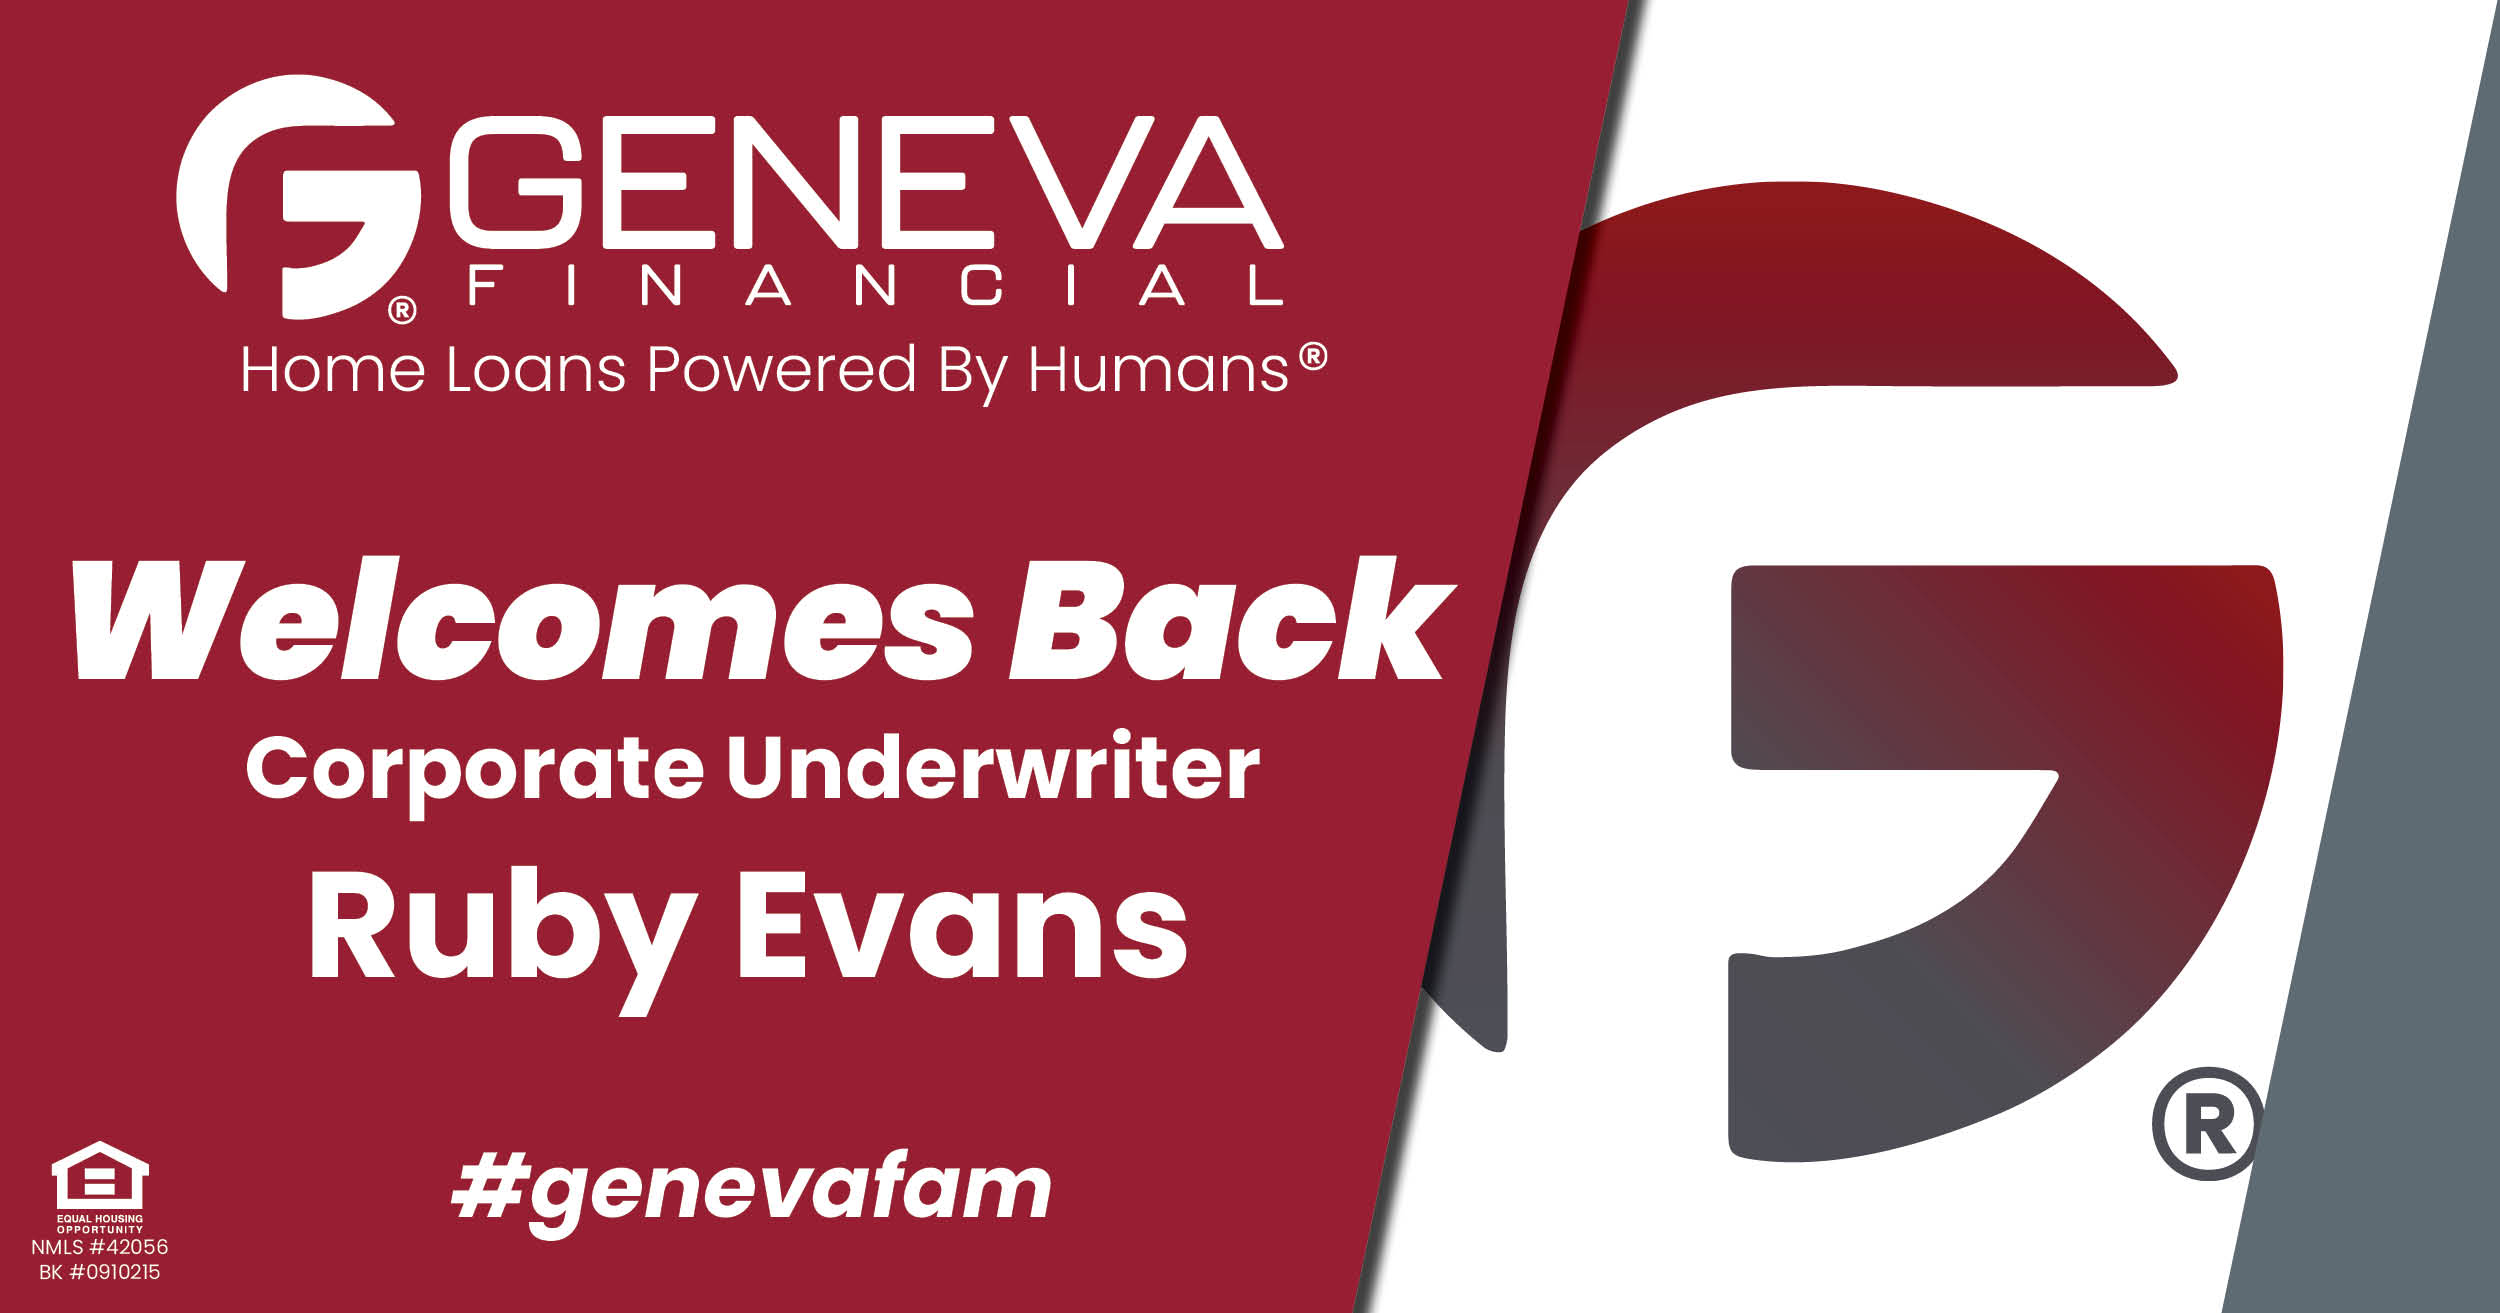 Geneva Financial Welcomes New Underwriter Ruby Evans to Geneva Corporate – Home Loans Powered by Humans®.